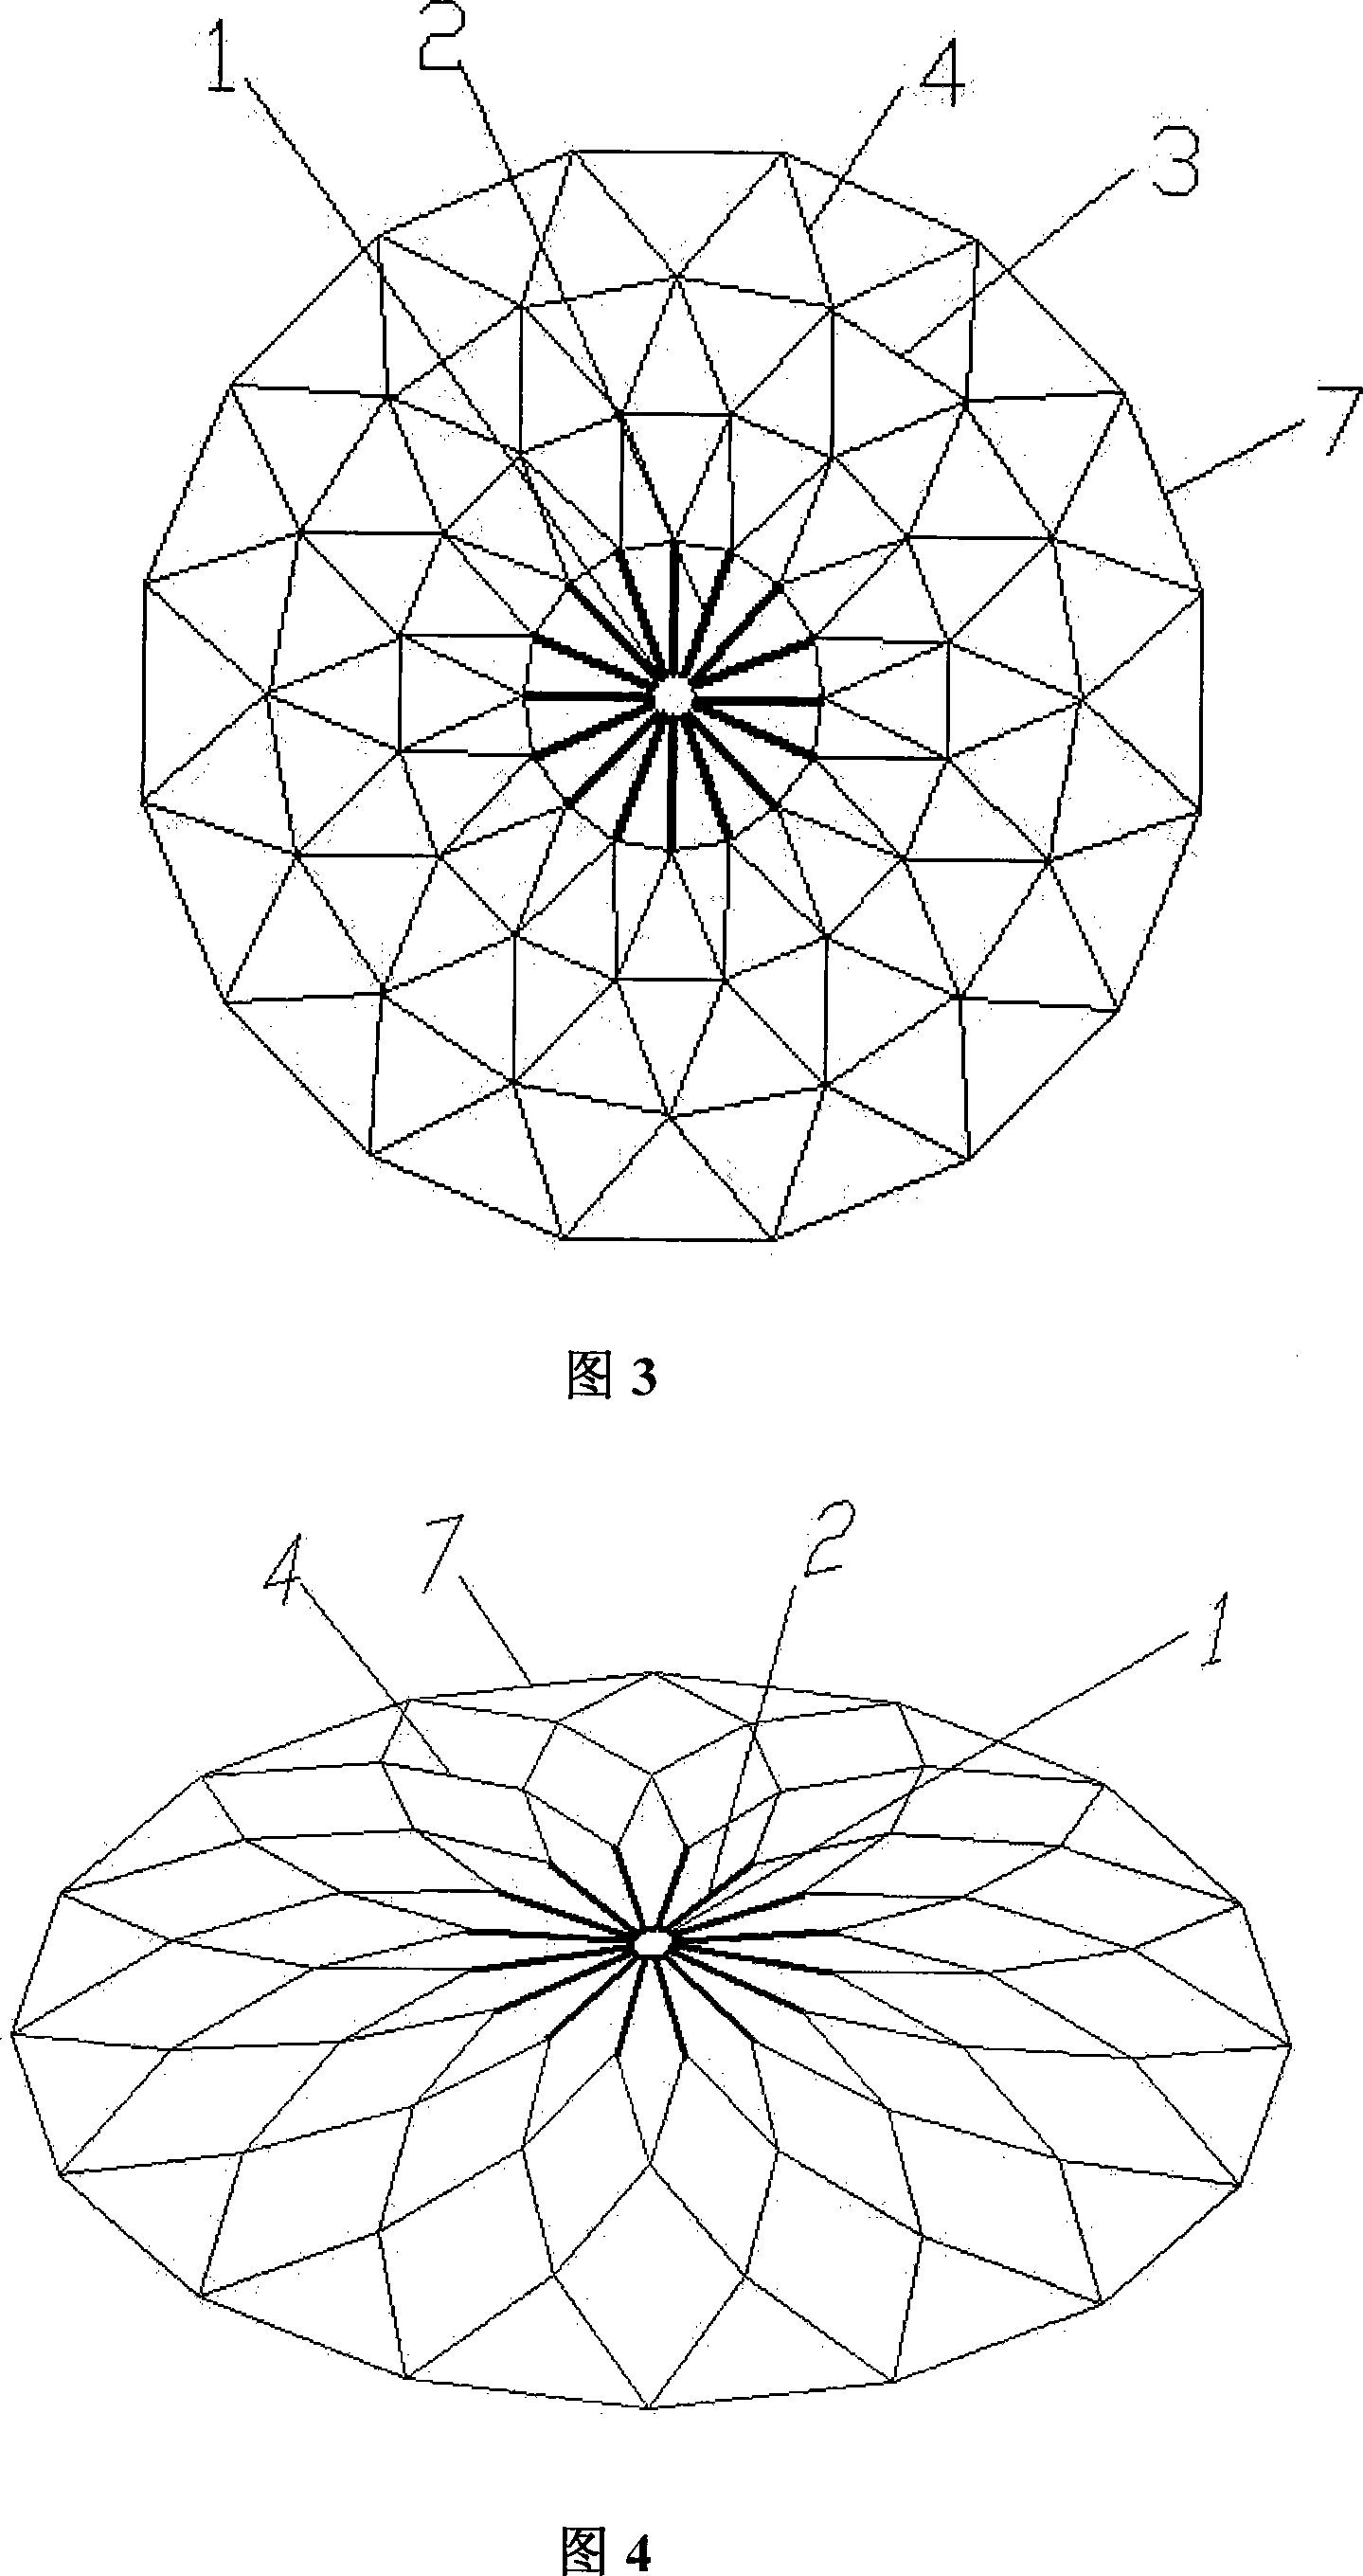 Sunflower-shaped cable dome structure